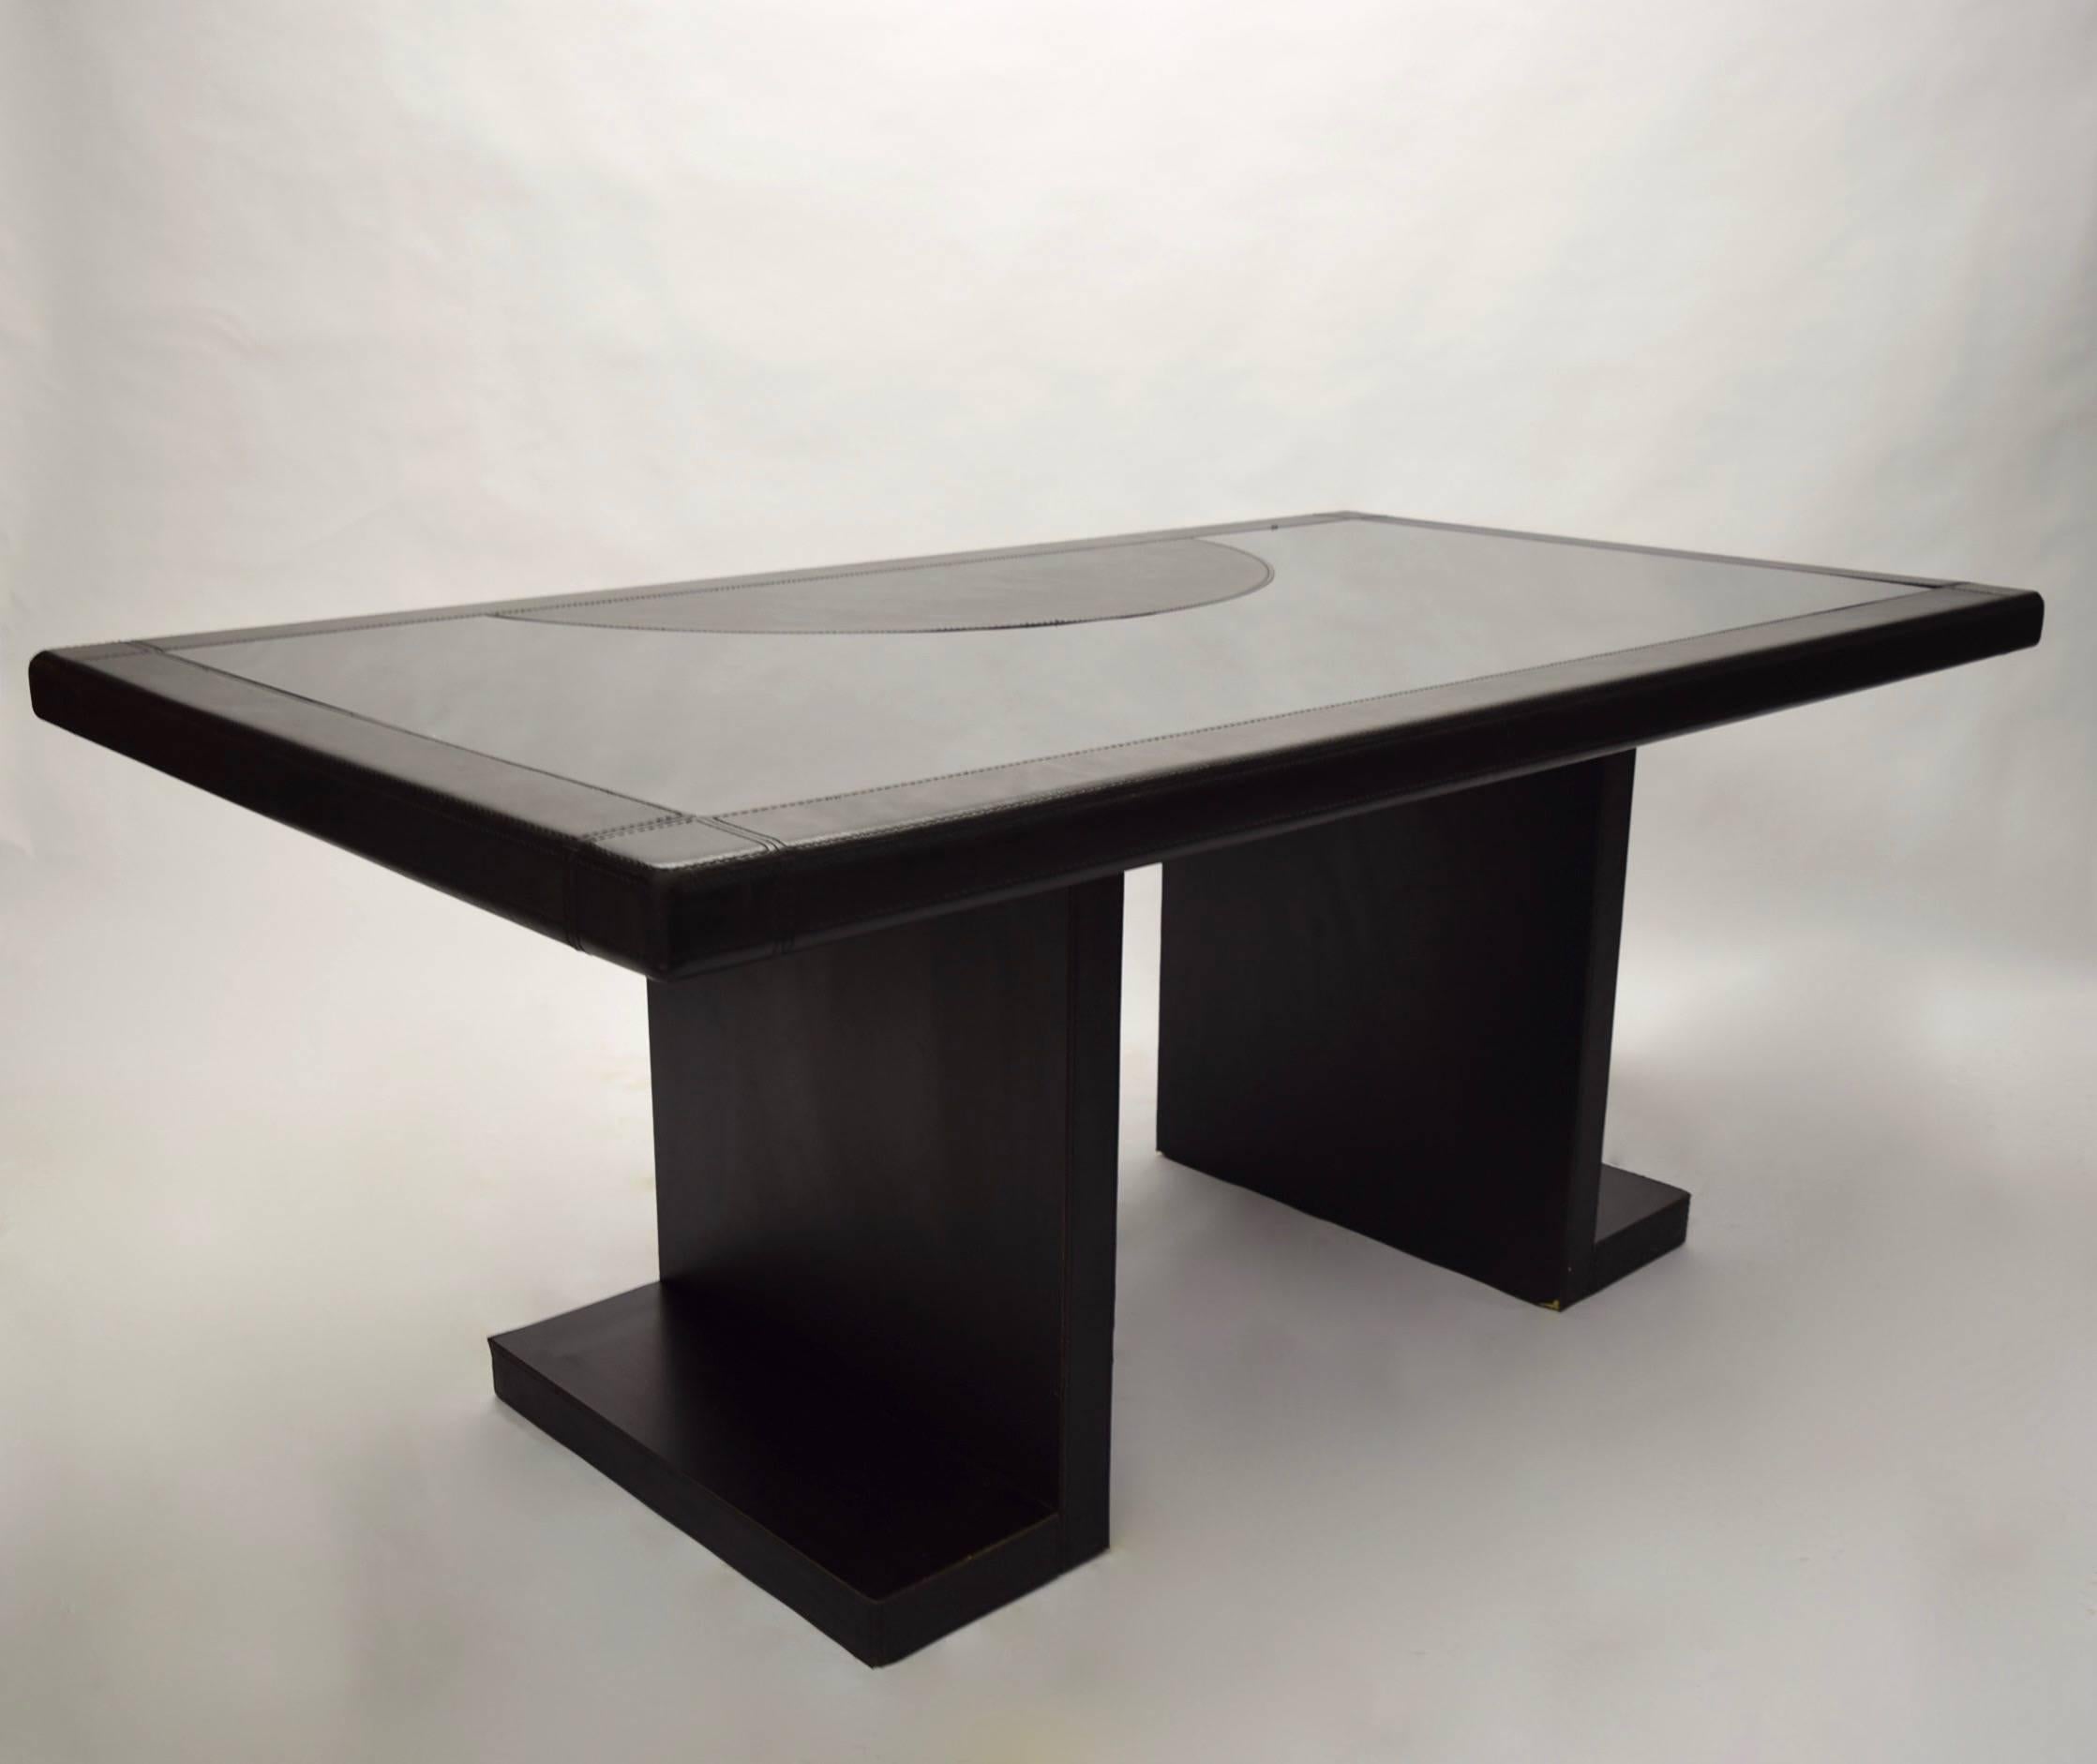 Late 20th Century Desk by Guido Faleschini for i4Mariani, Distributed by Pace, Italy C. 1979